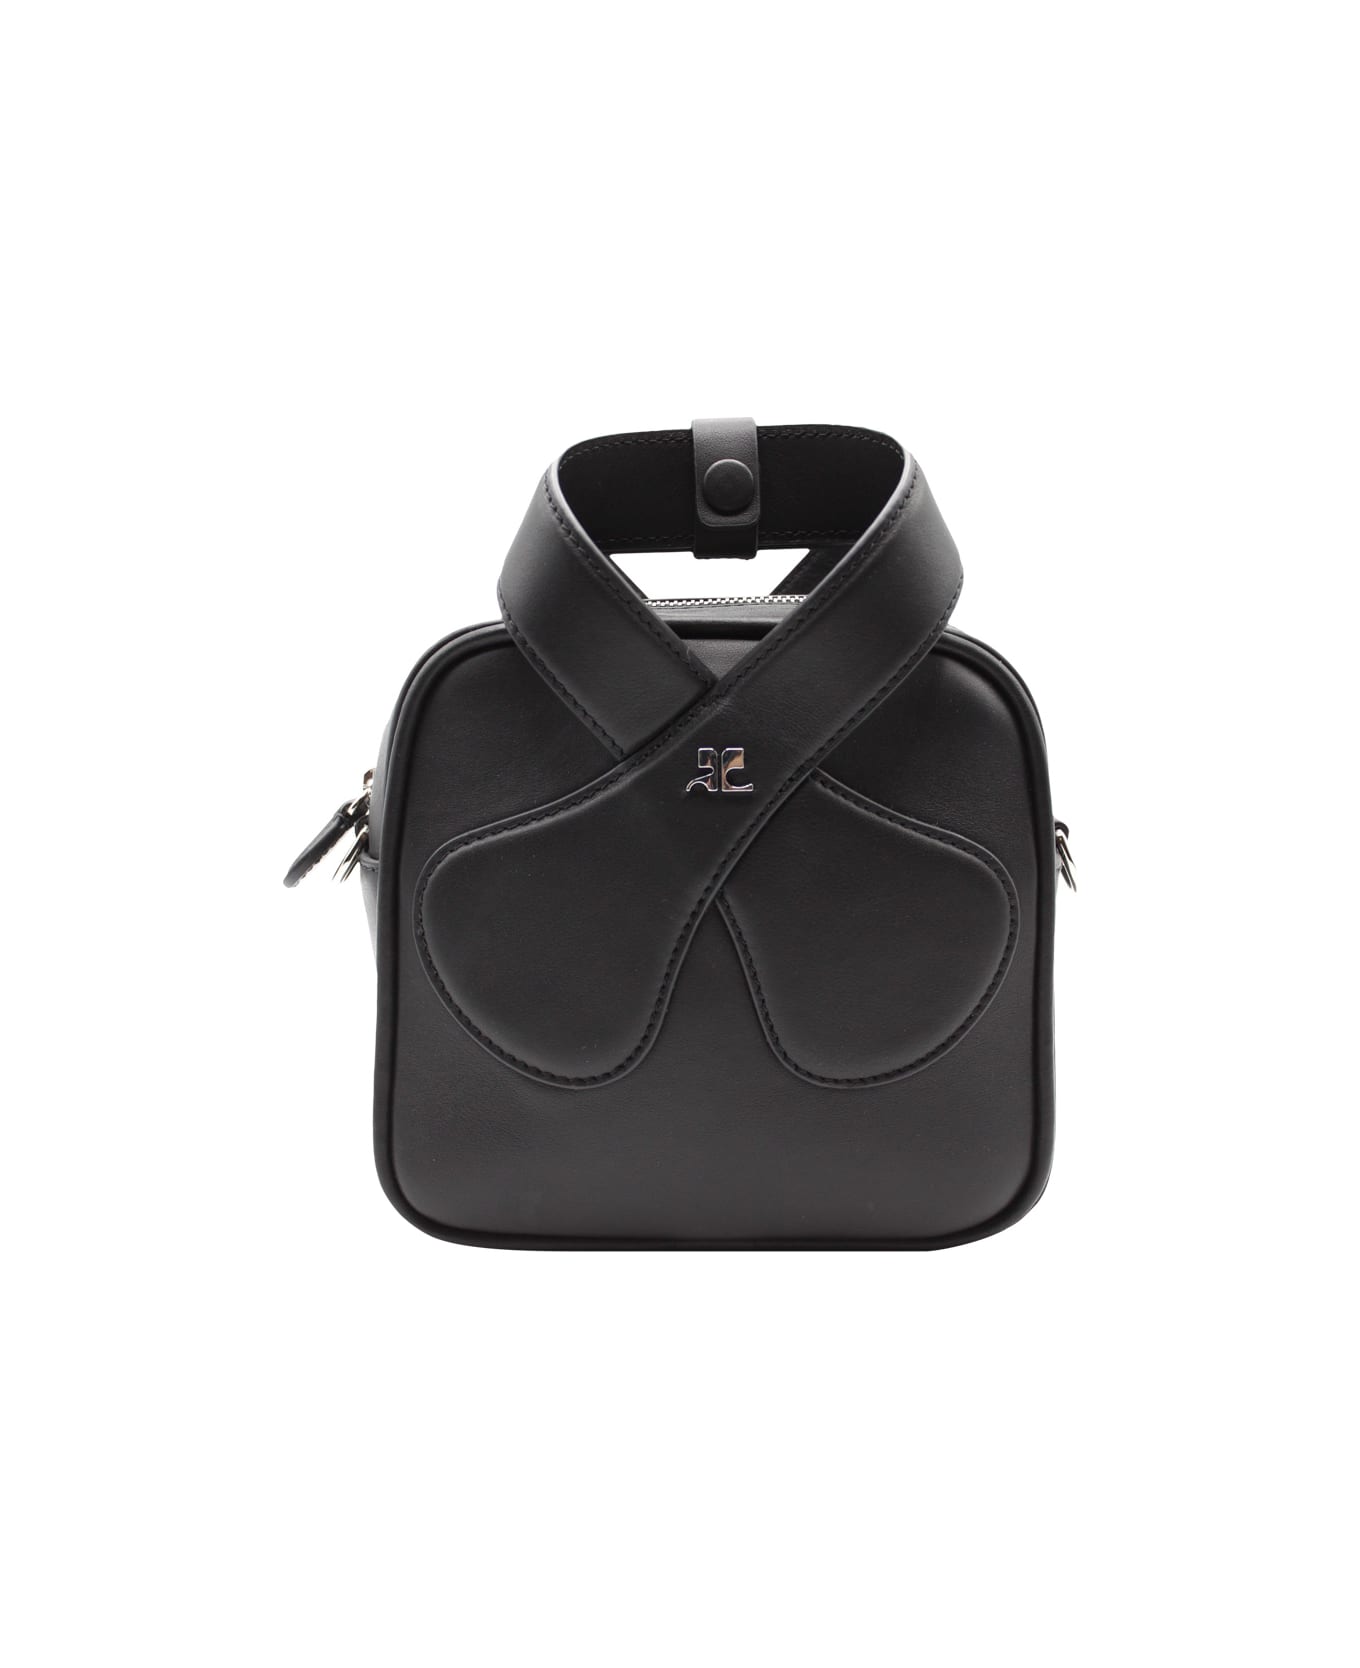 Introducing the Courrèges Loop bag